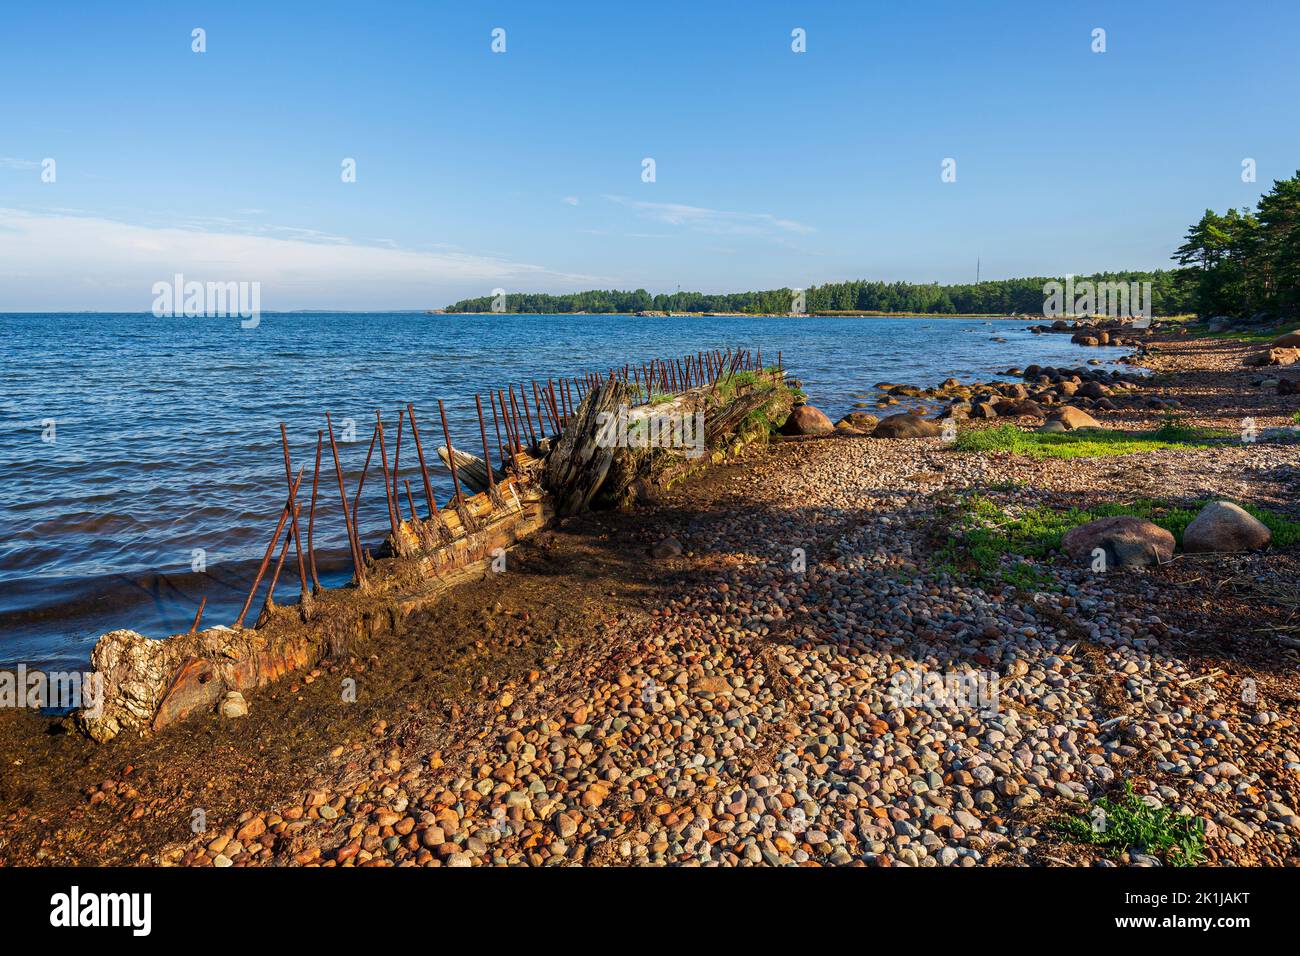 Old shipwreck at the rocky coastline along the Tulliniemi nature trail in Hanko, Finland, on a sunny day in the summer. Stock Photo